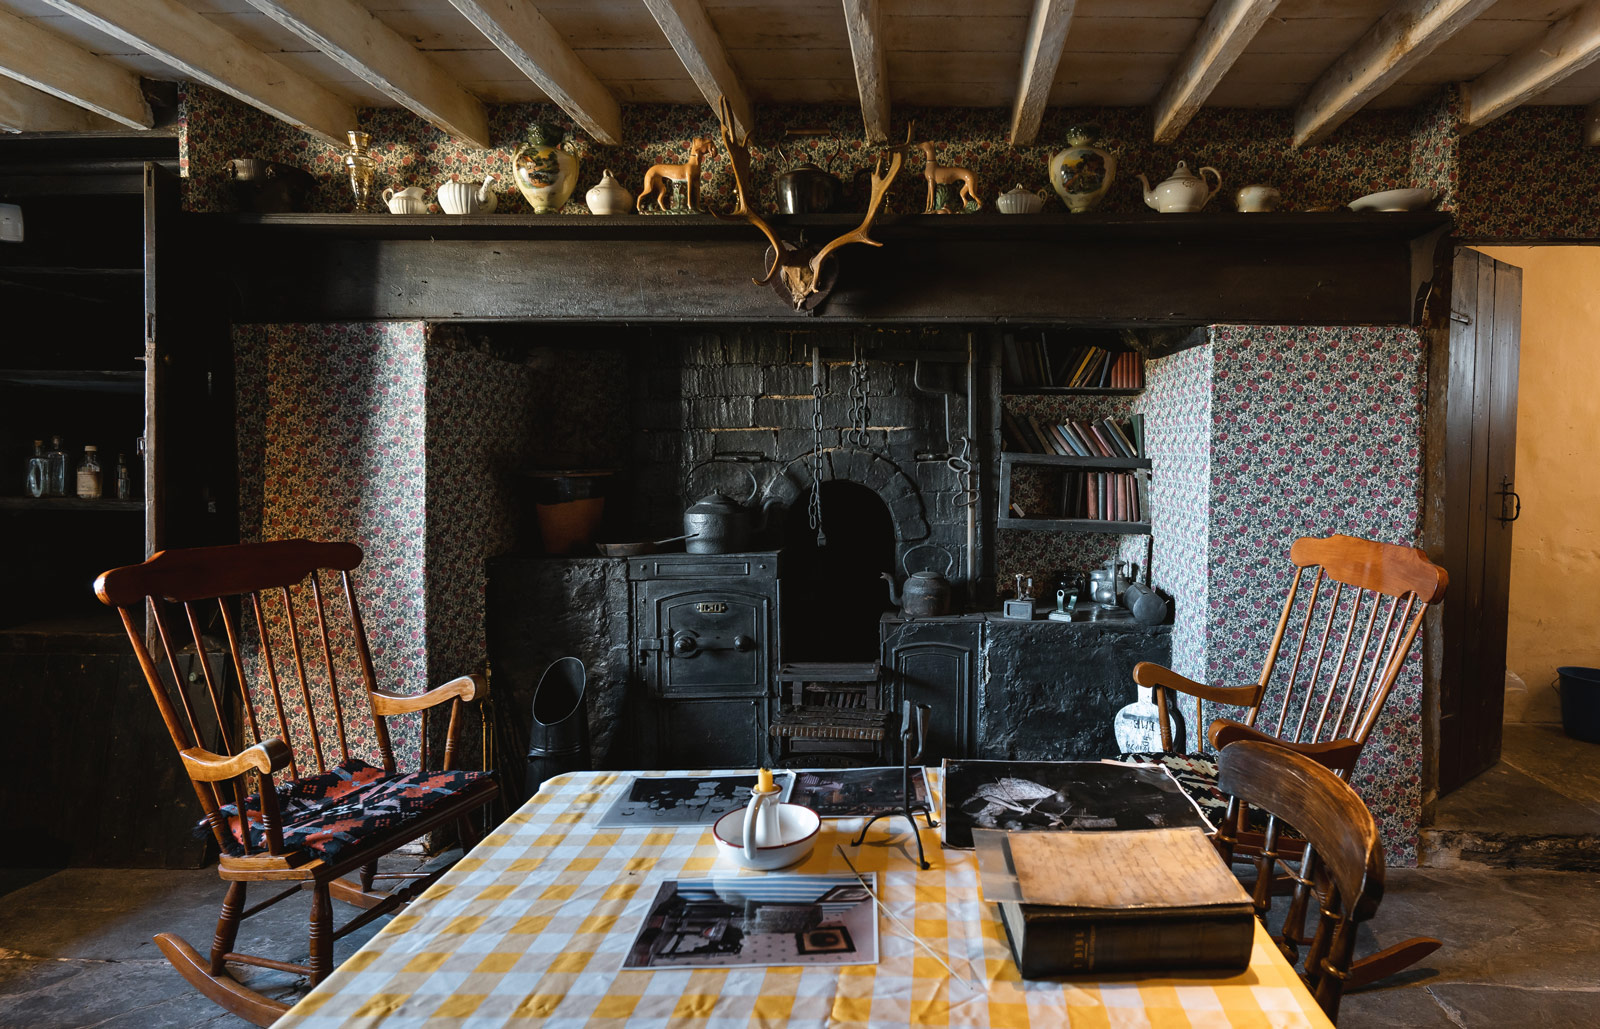 Yr Ysgwrn's stove and fireplace with two rocking chairs either side